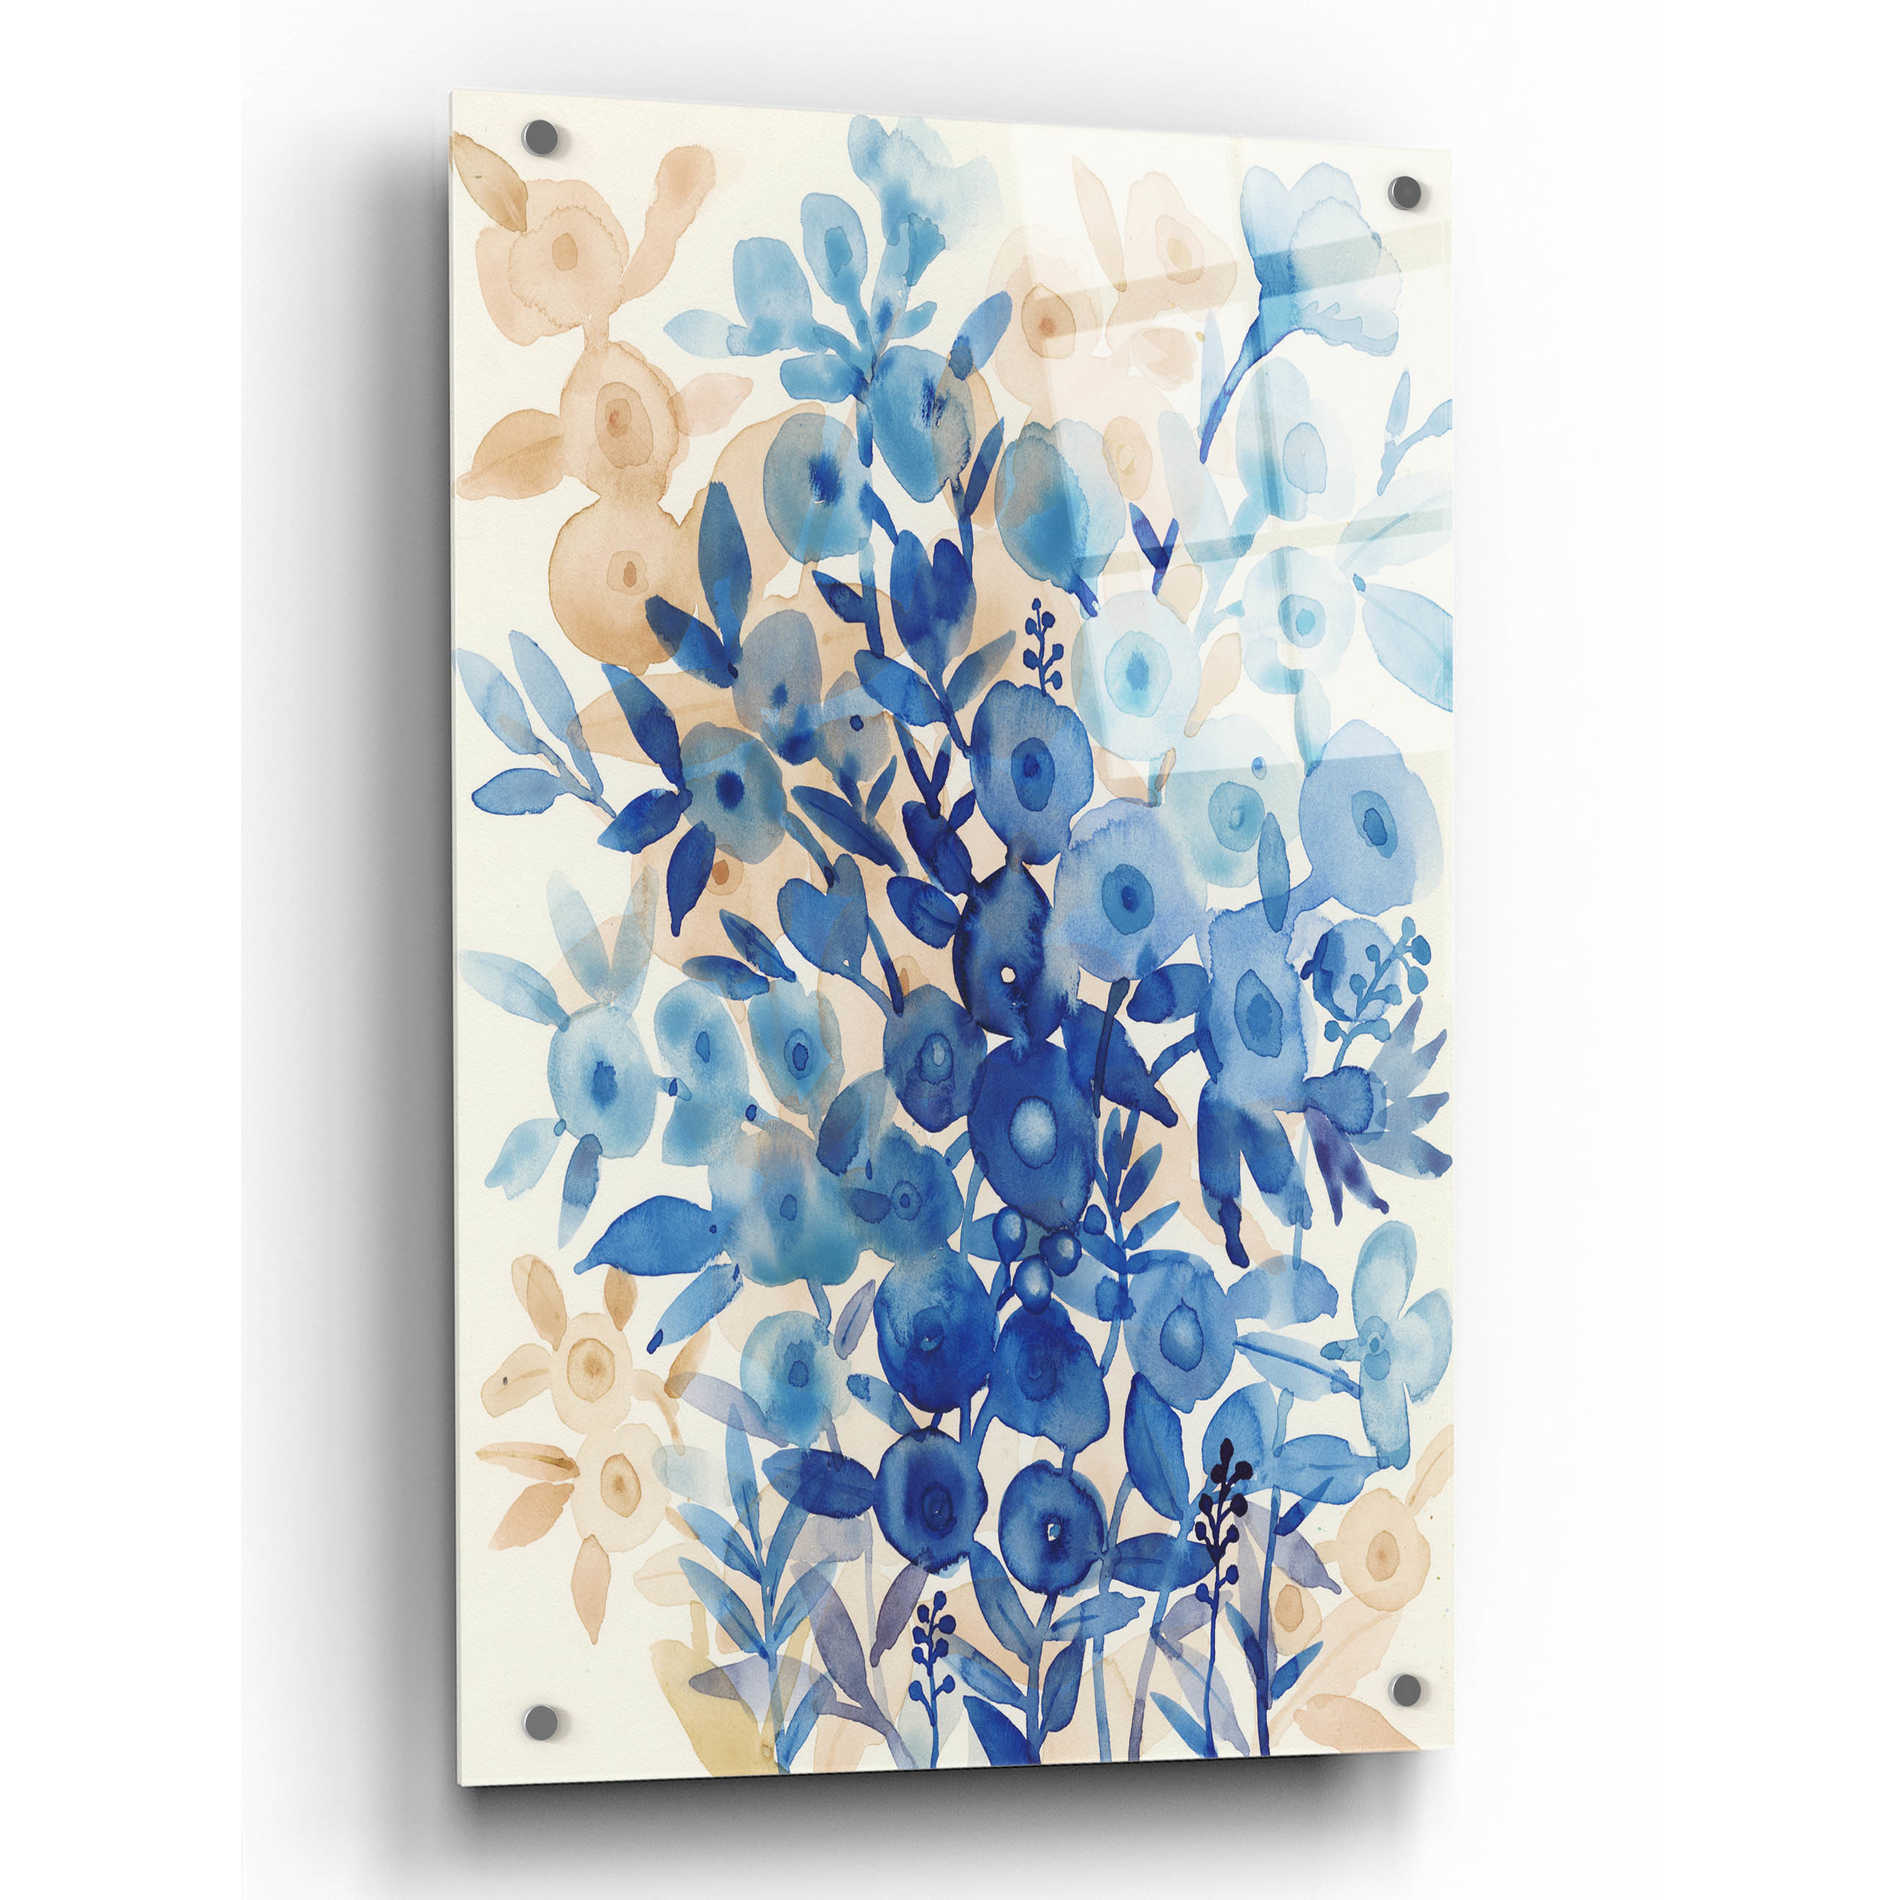 Epic Art 'Blueberry Floral II' by Tim O'Toole, Acrylic Glass Wall Art,24x36